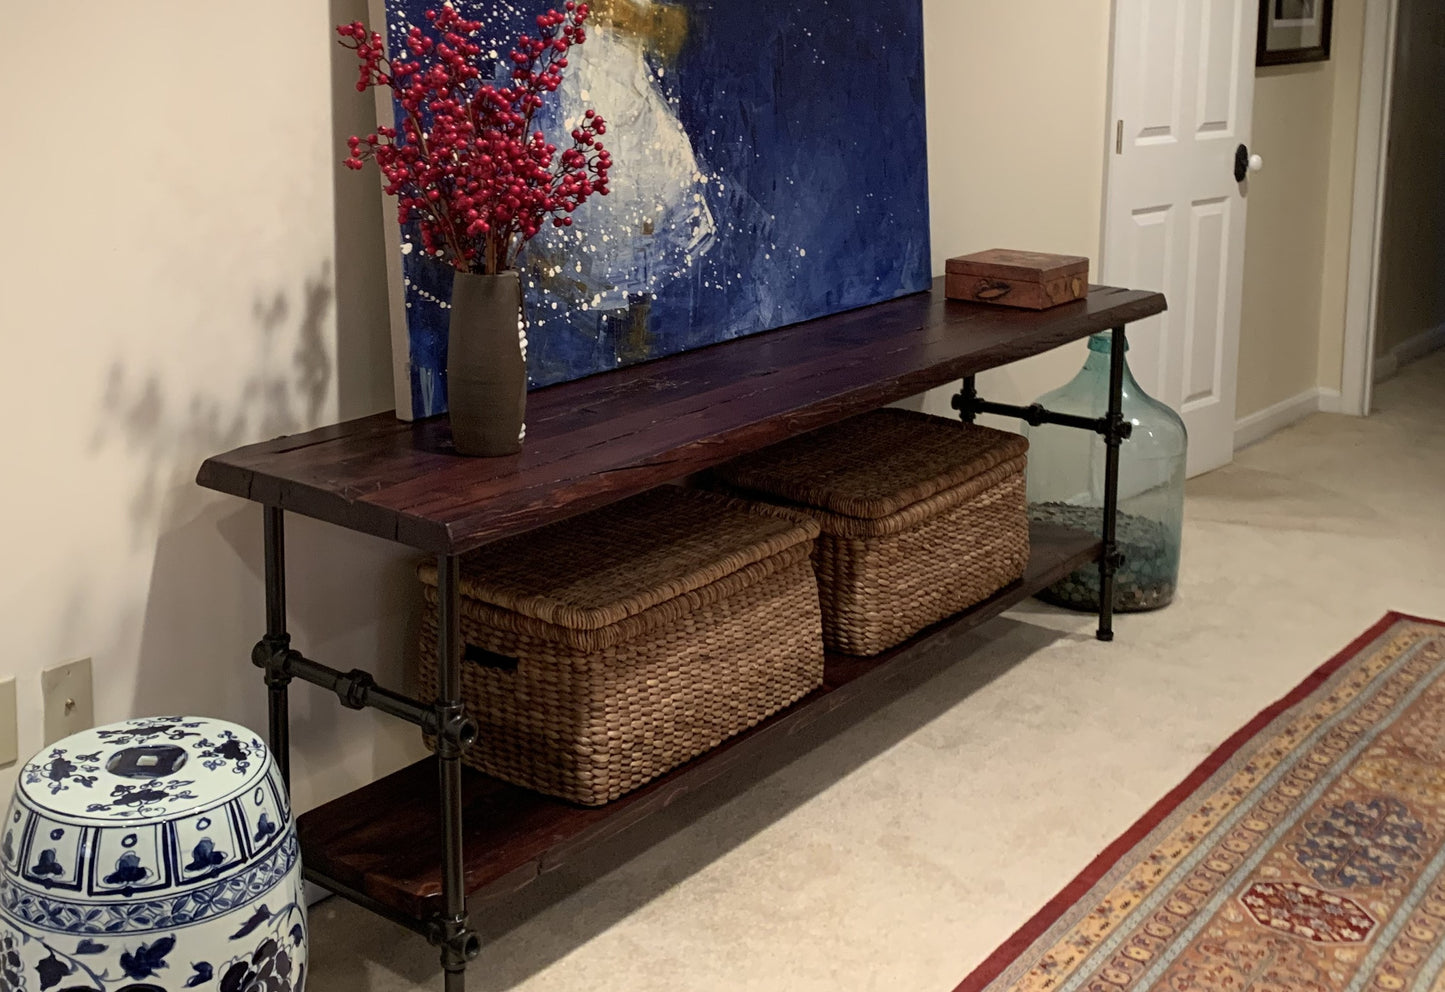 Shelf tables with Reclaimed wood, Customize your one or two shelf table, many sizes.